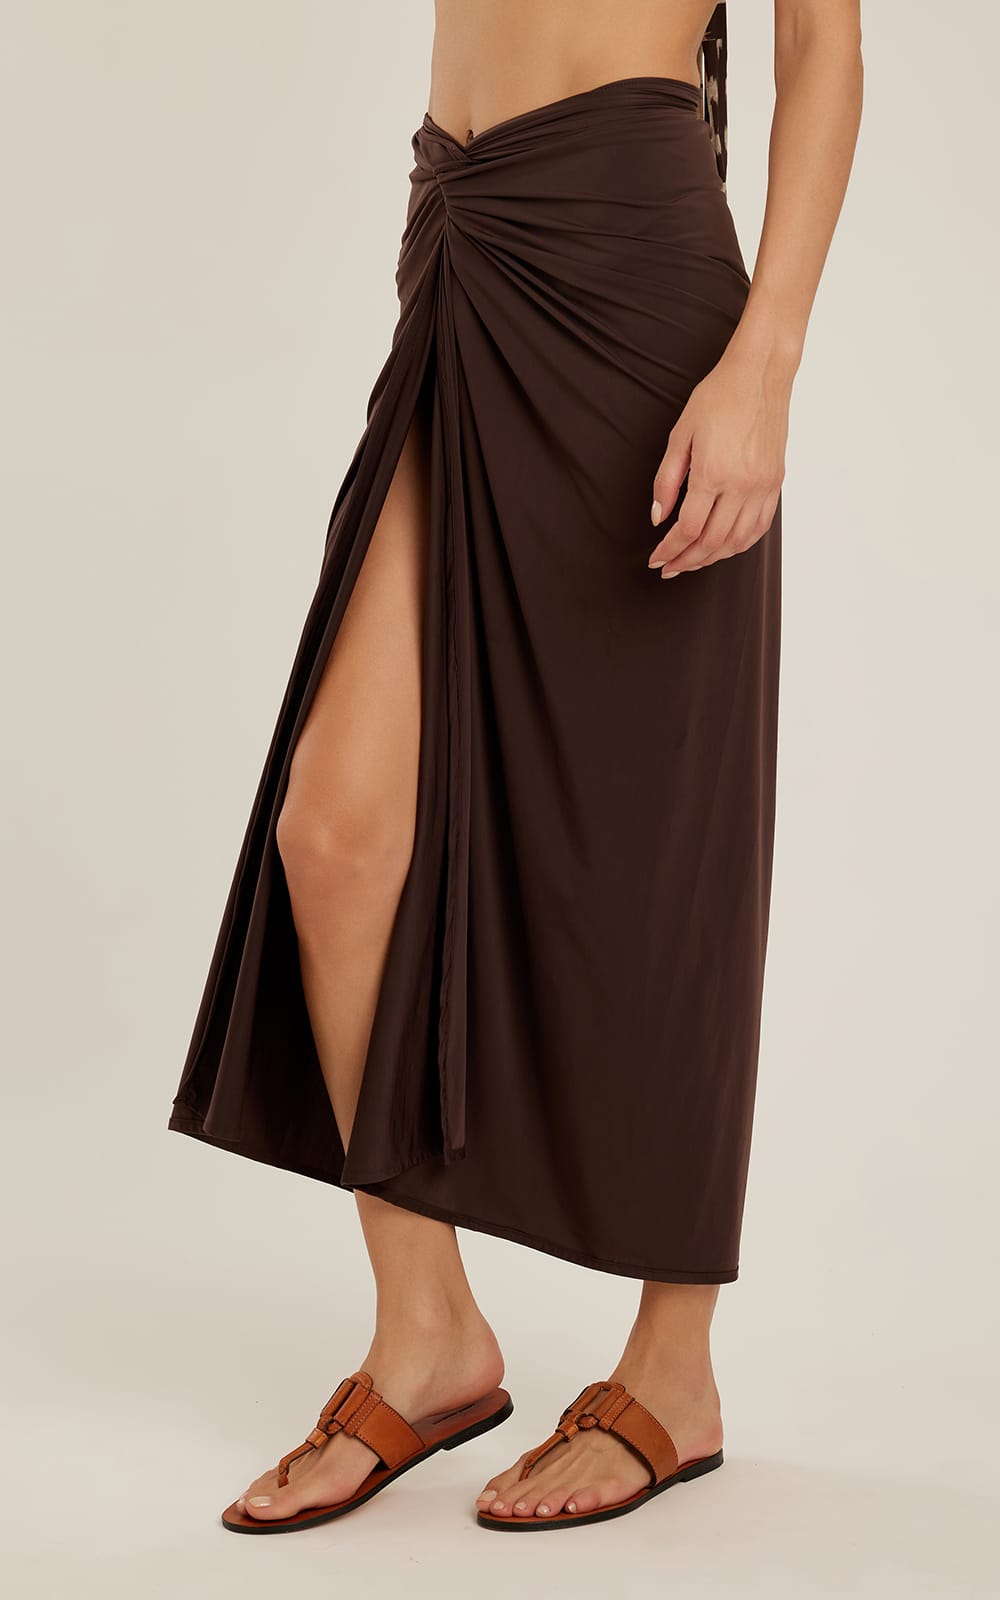 Lenny Niemeyer Knot Touch Sarong in Coffee -Wear Multiple Ways